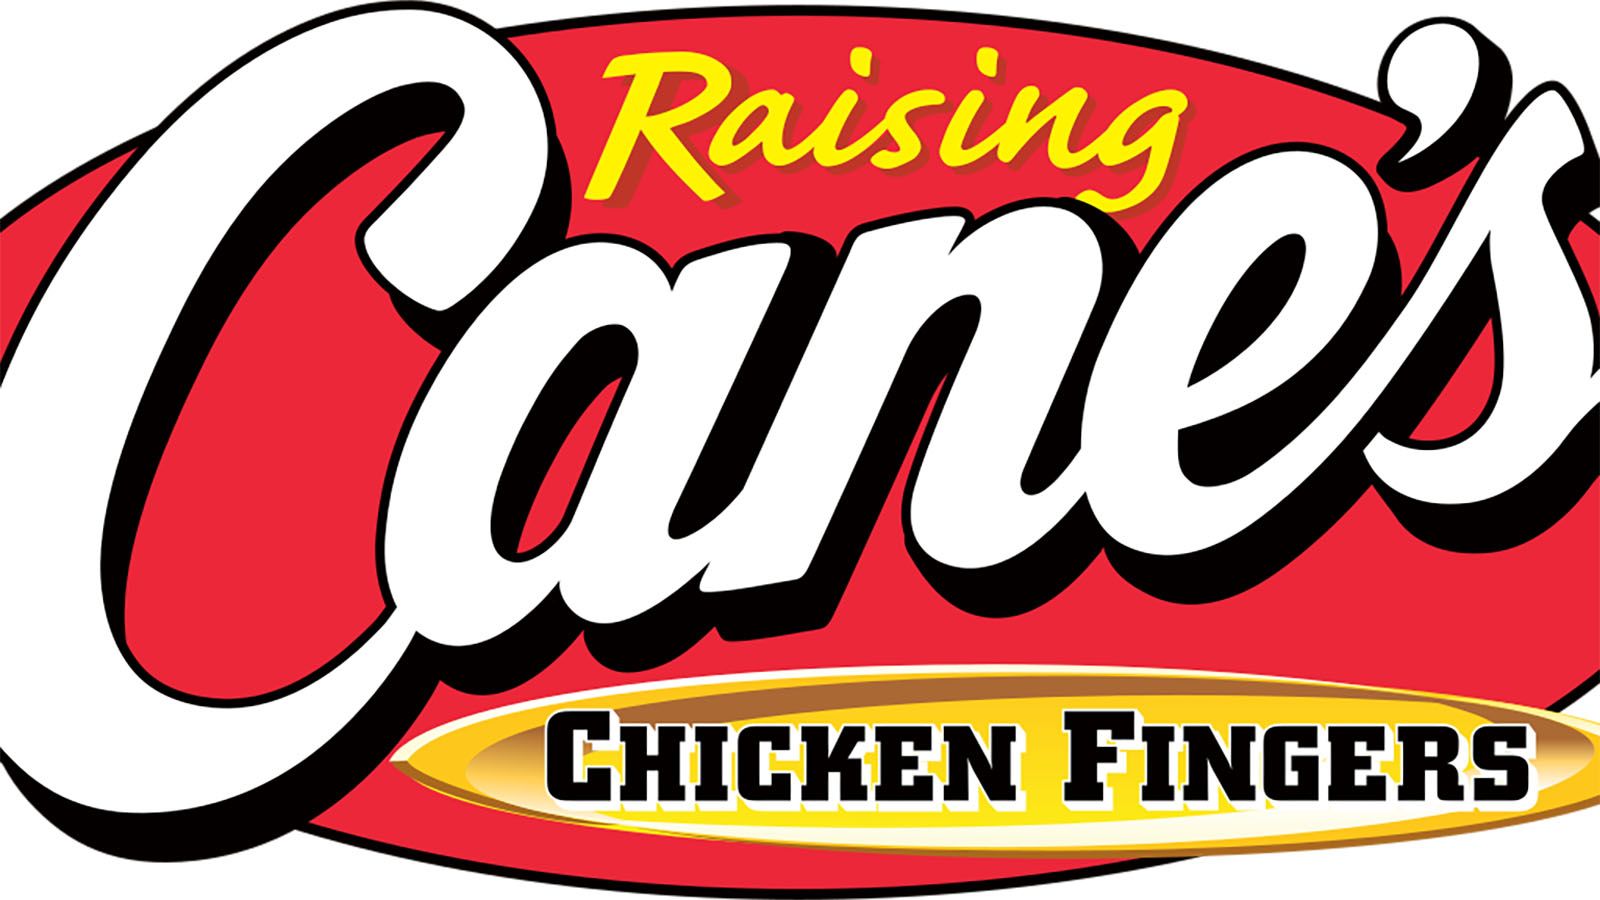 Raising Cane's is applying to move into the space formerly occupied by Pizza Hut in the Northcrest Shopping Center.